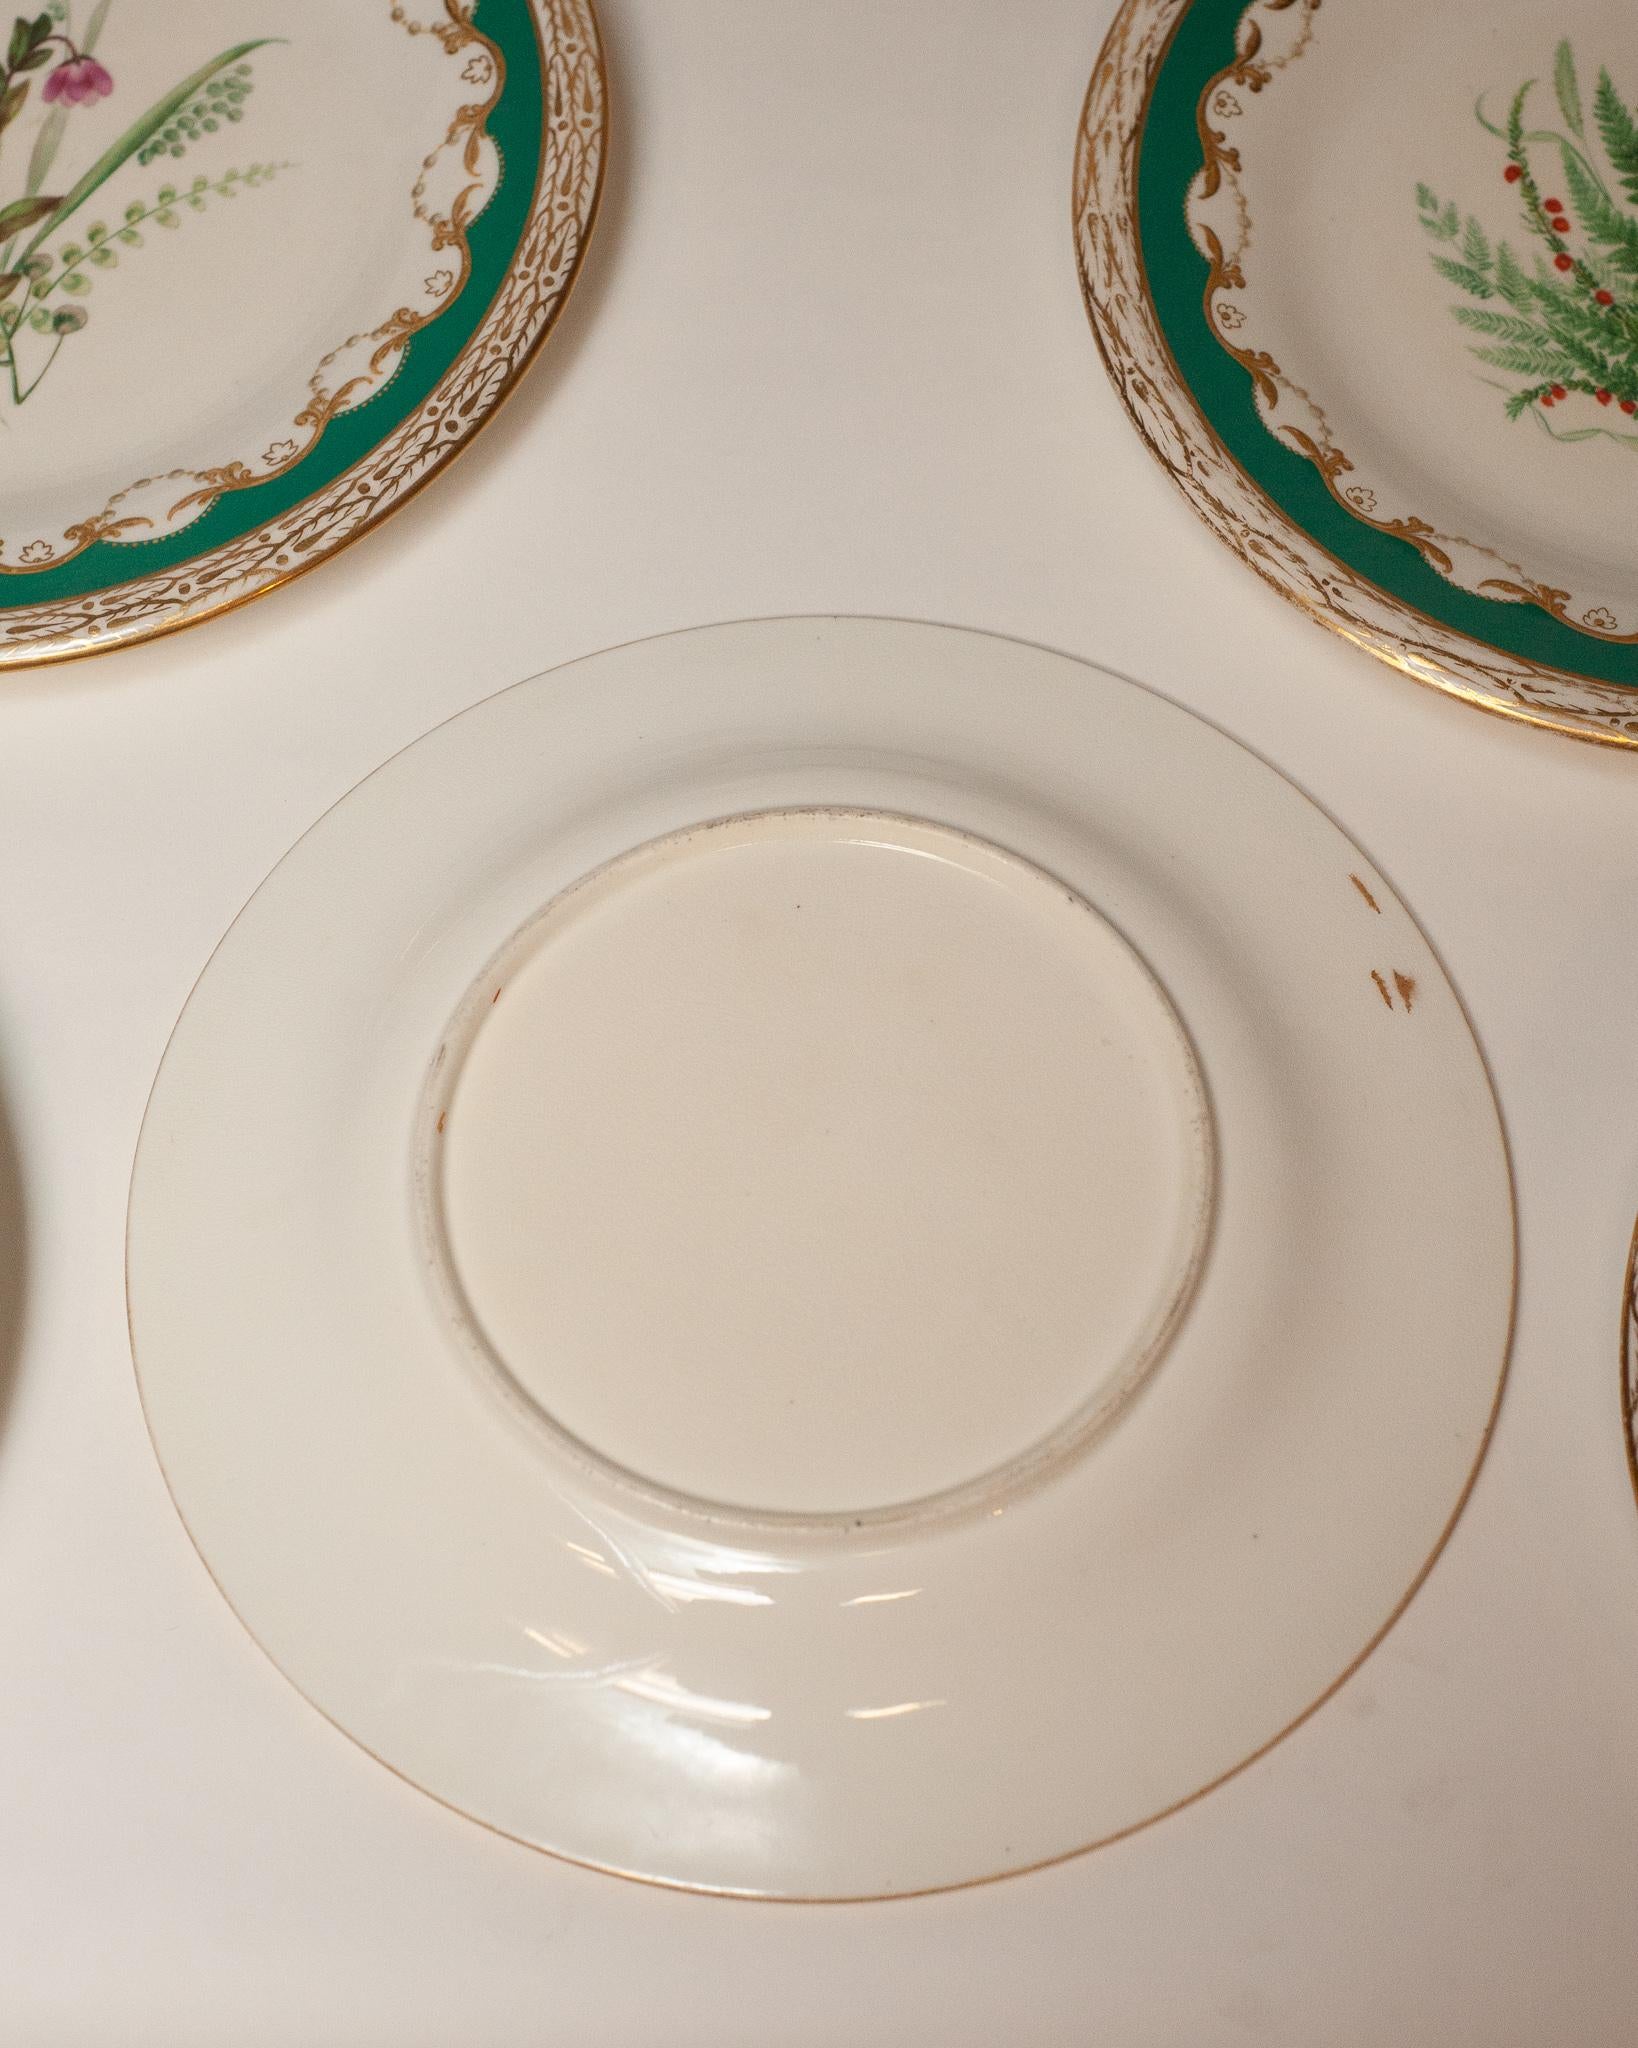 Porcelain Antique English Floral Dishes Set of Tall and Short Tazzas and Dessert Plates For Sale